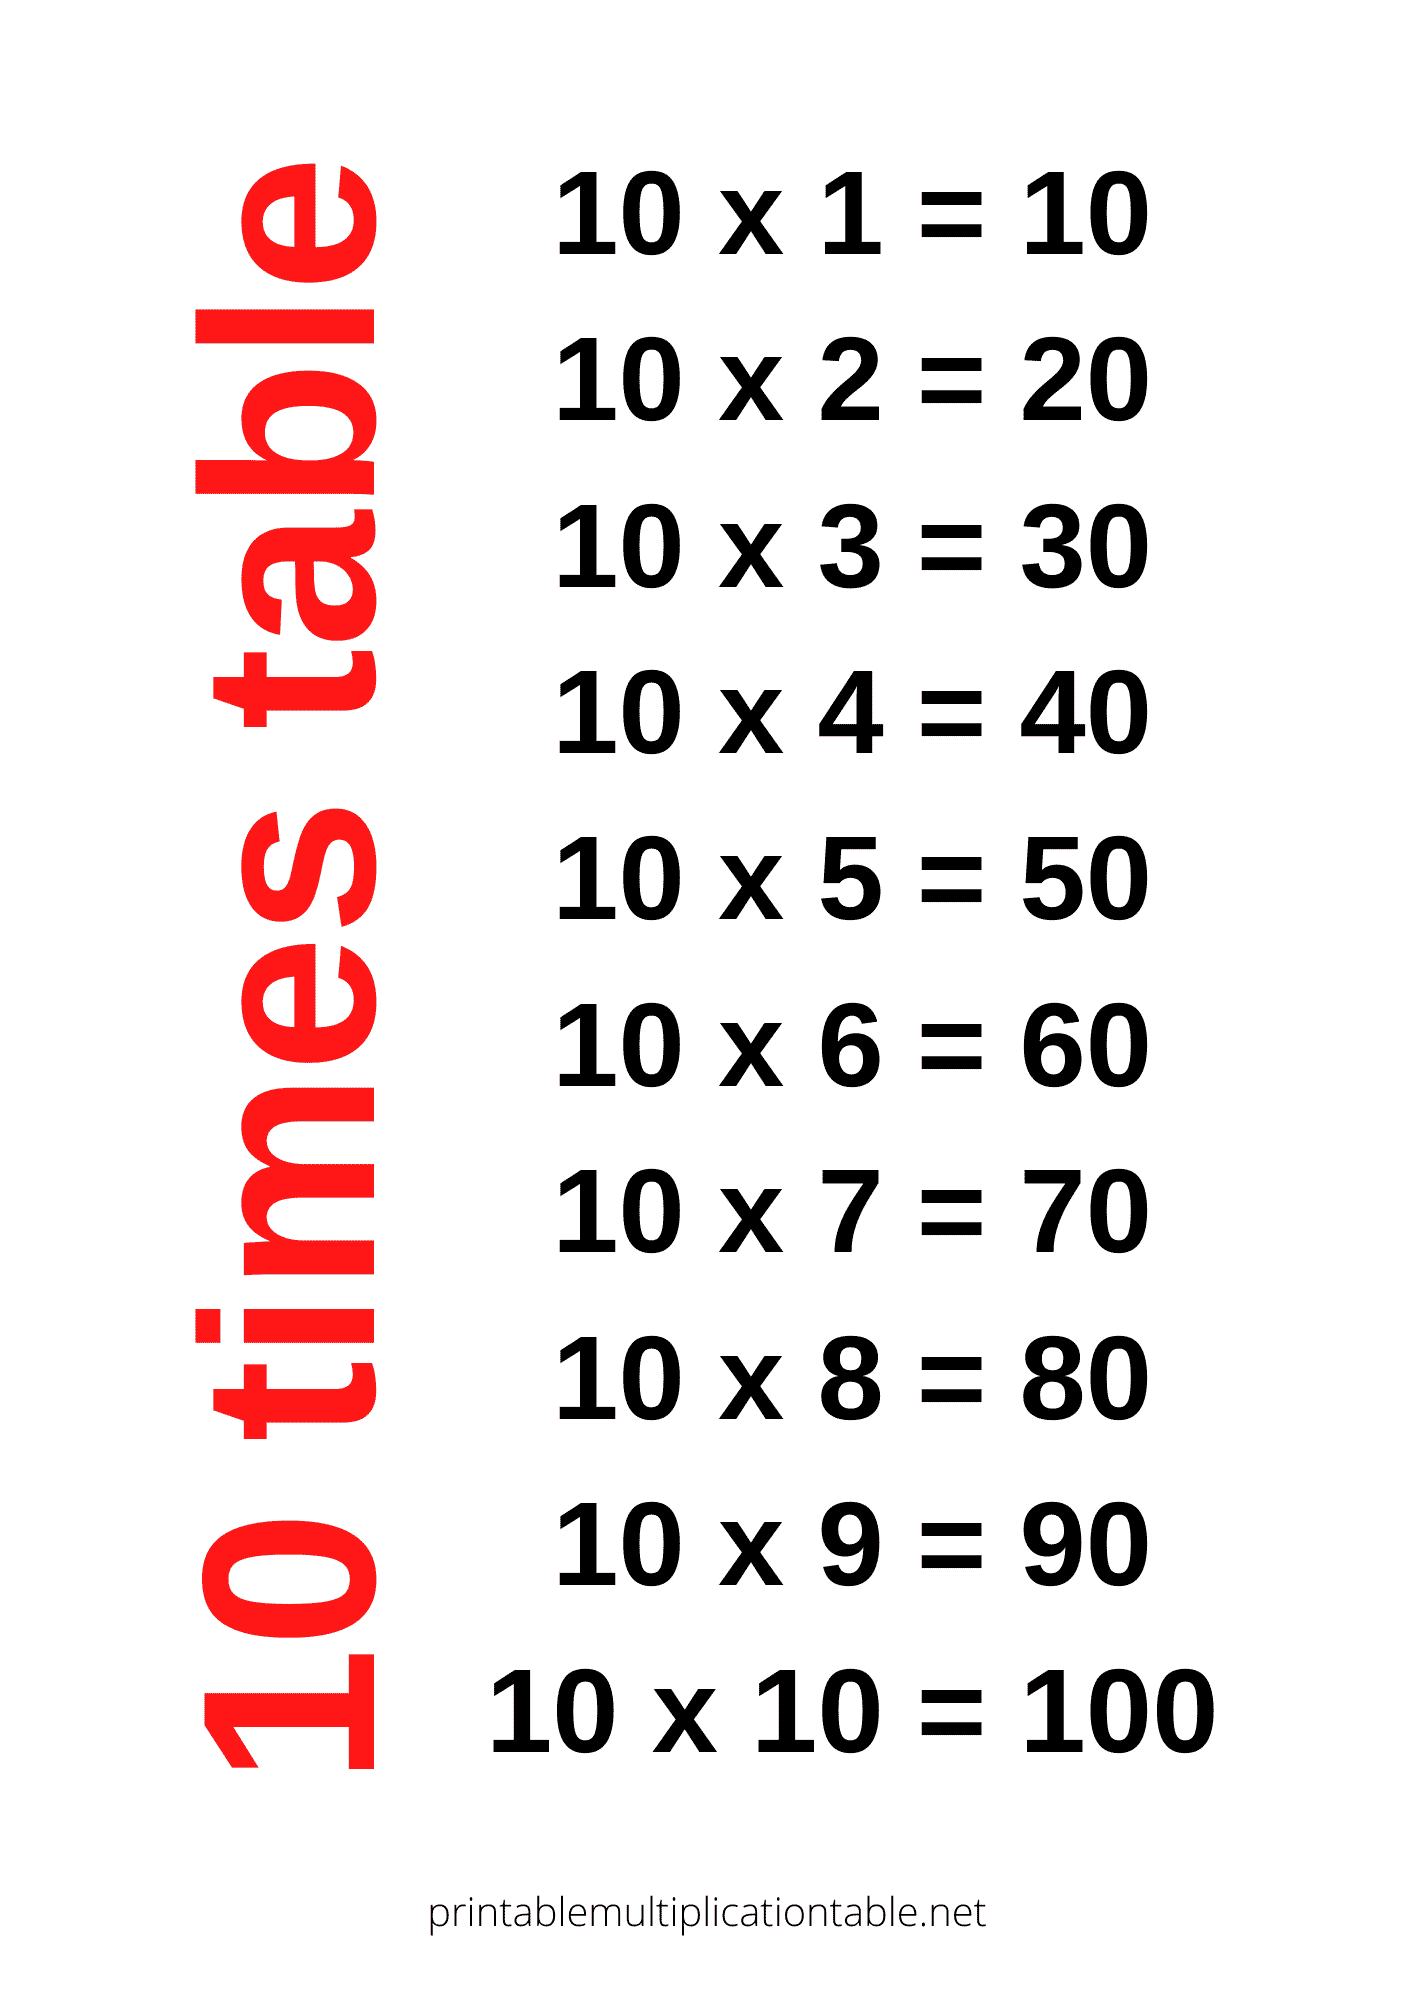 10 times table chart